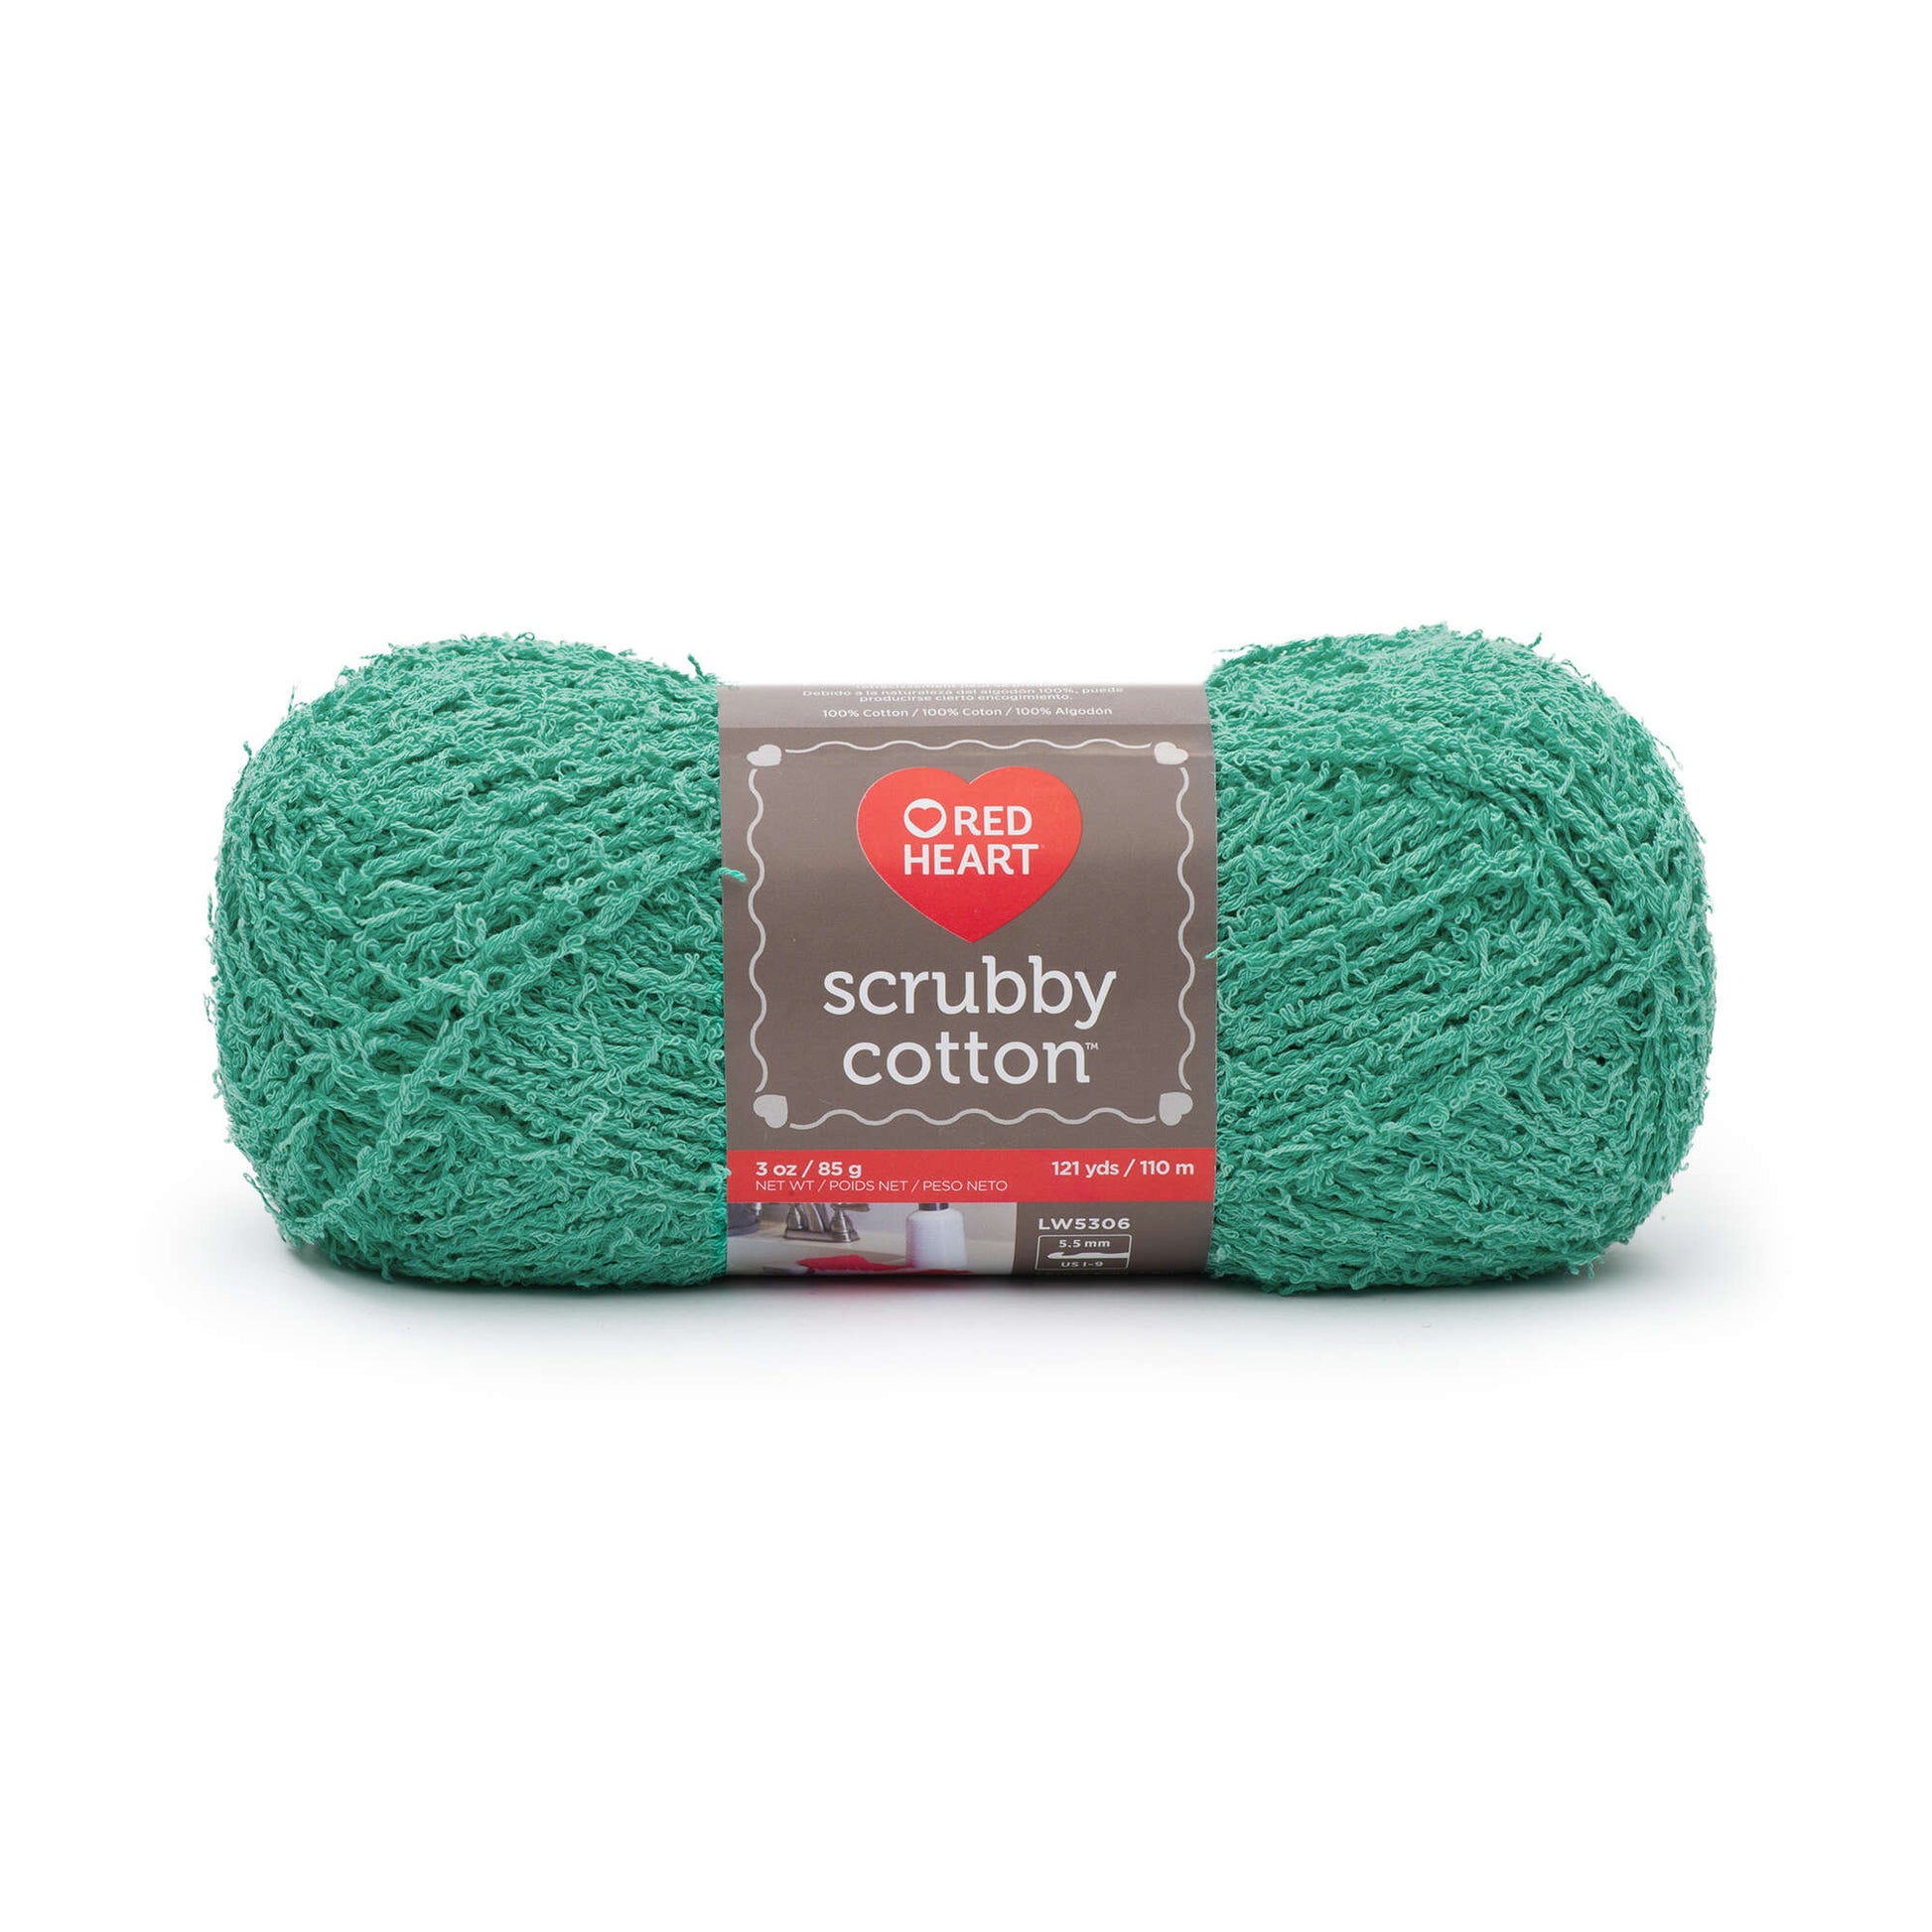 Red Heart Scrubby Cotton Yarn - Discontinued shades Jade